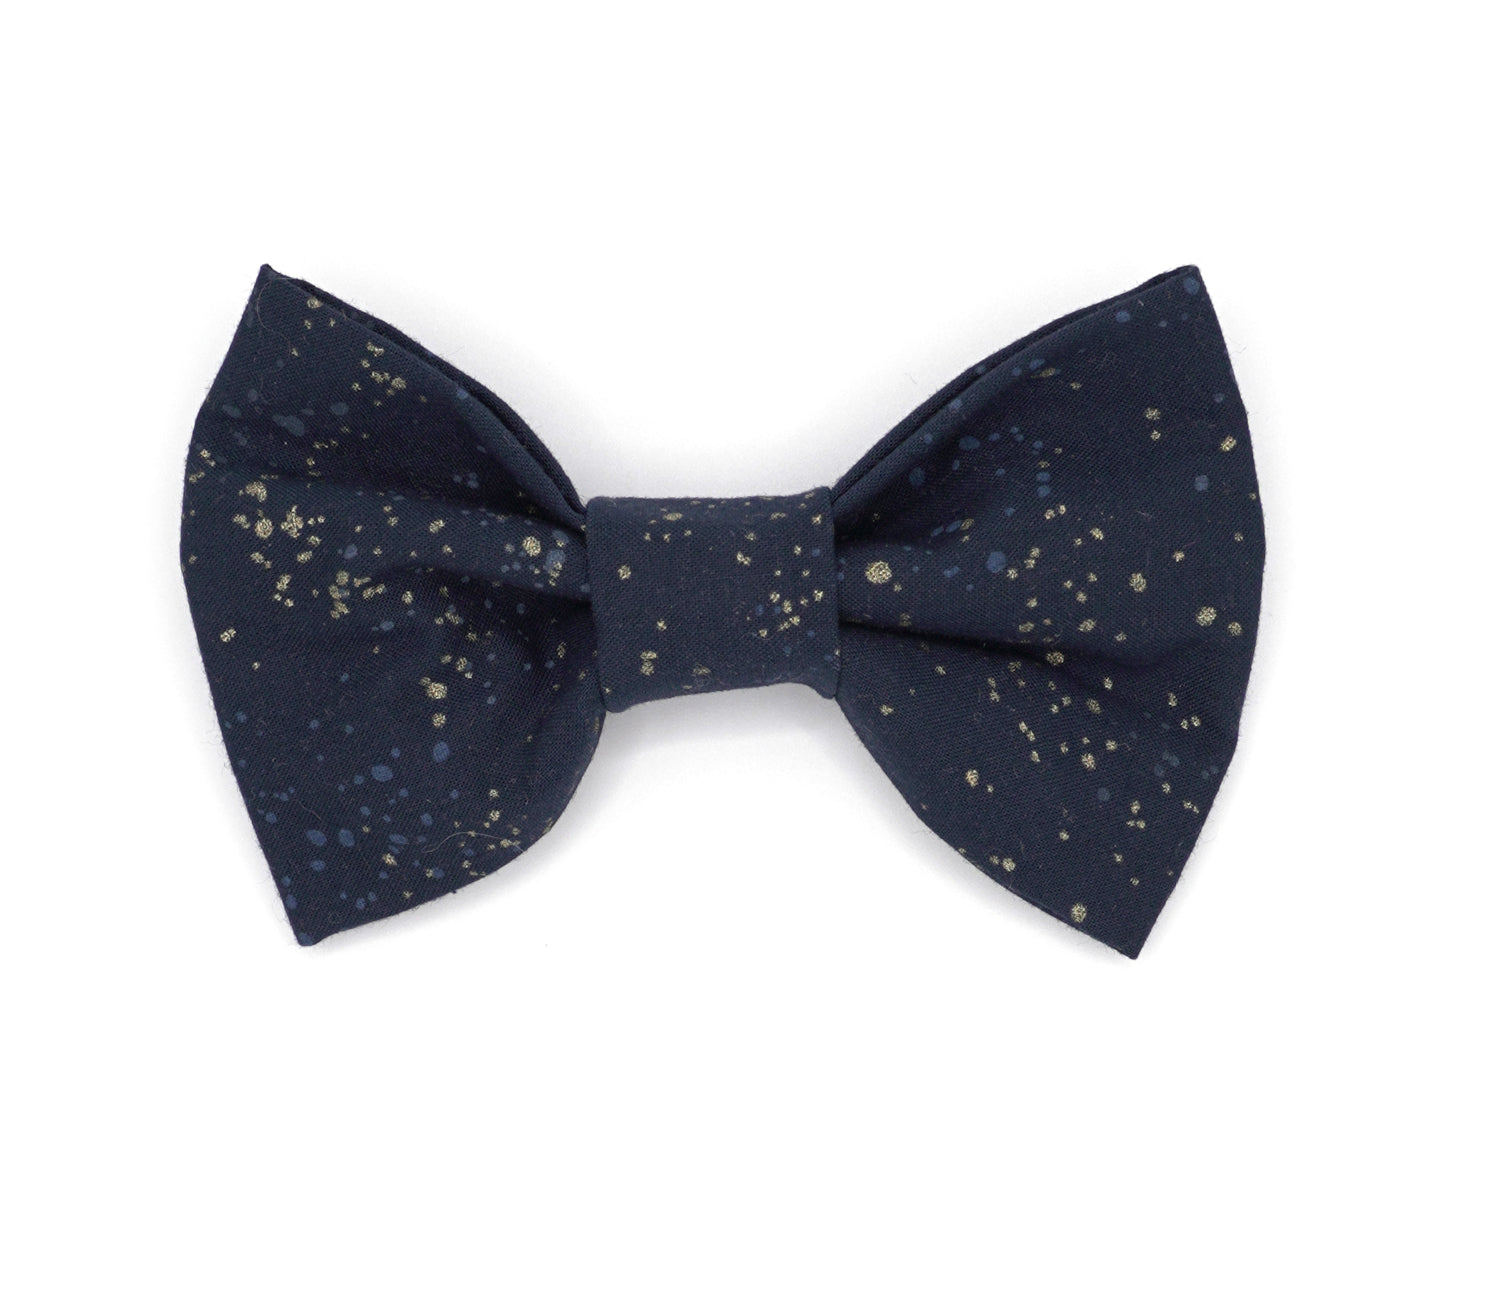 Handmade cotton bow tie for dogs (or other pets). Elastic straps on back with snaps make it easy to add to collar, harness, or leash. Navy blue background with white and yellow "splatter" dots.